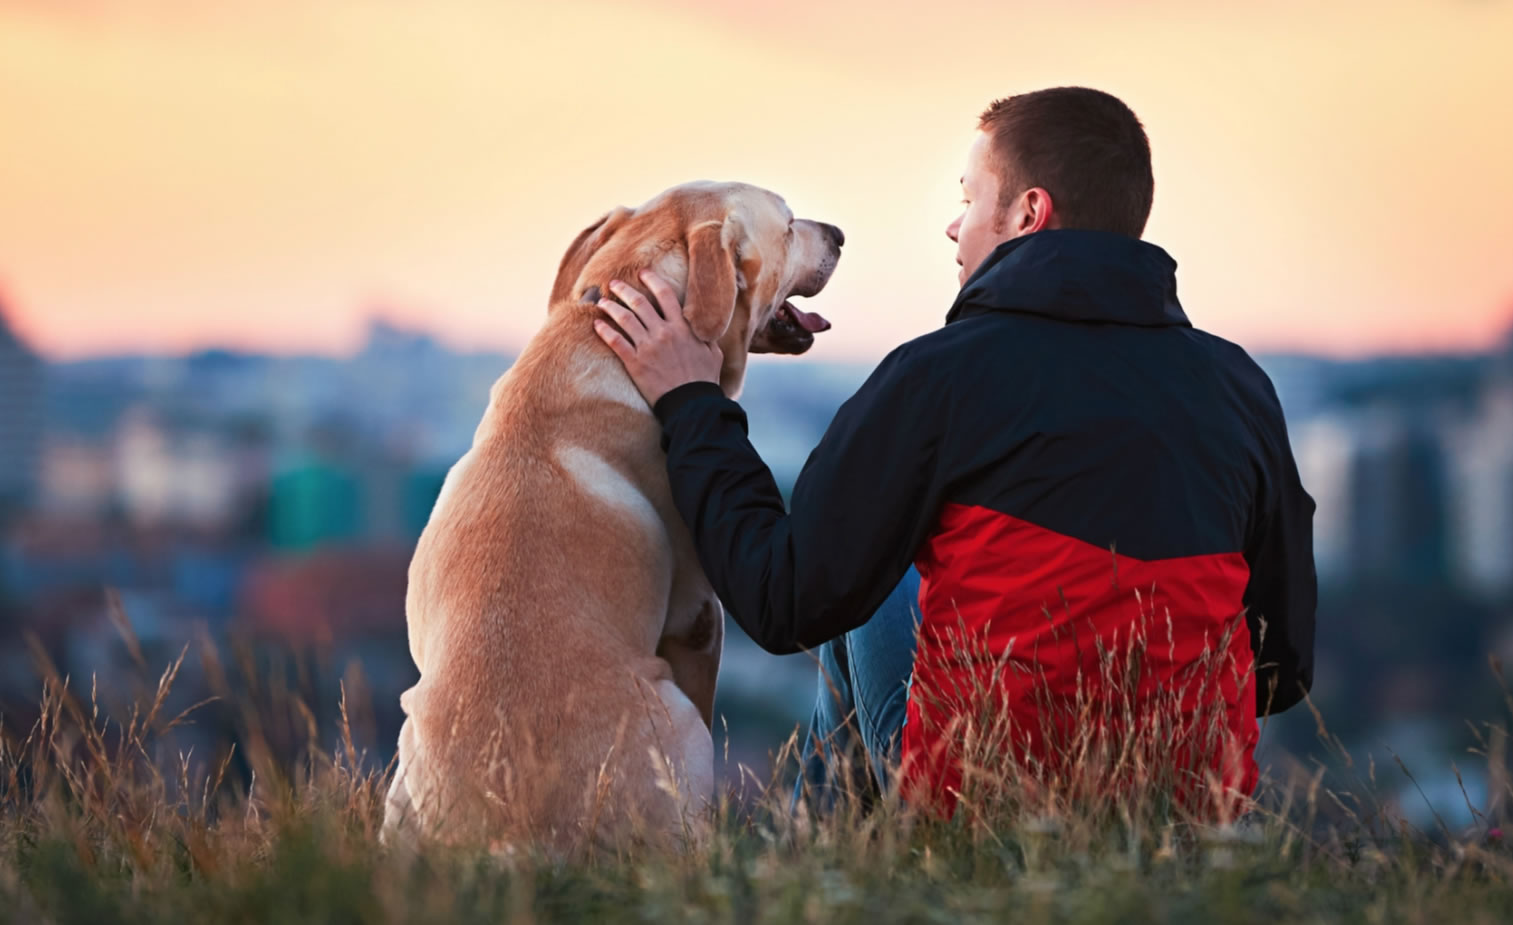 Man petting dog at sunset overlooking a town in distance